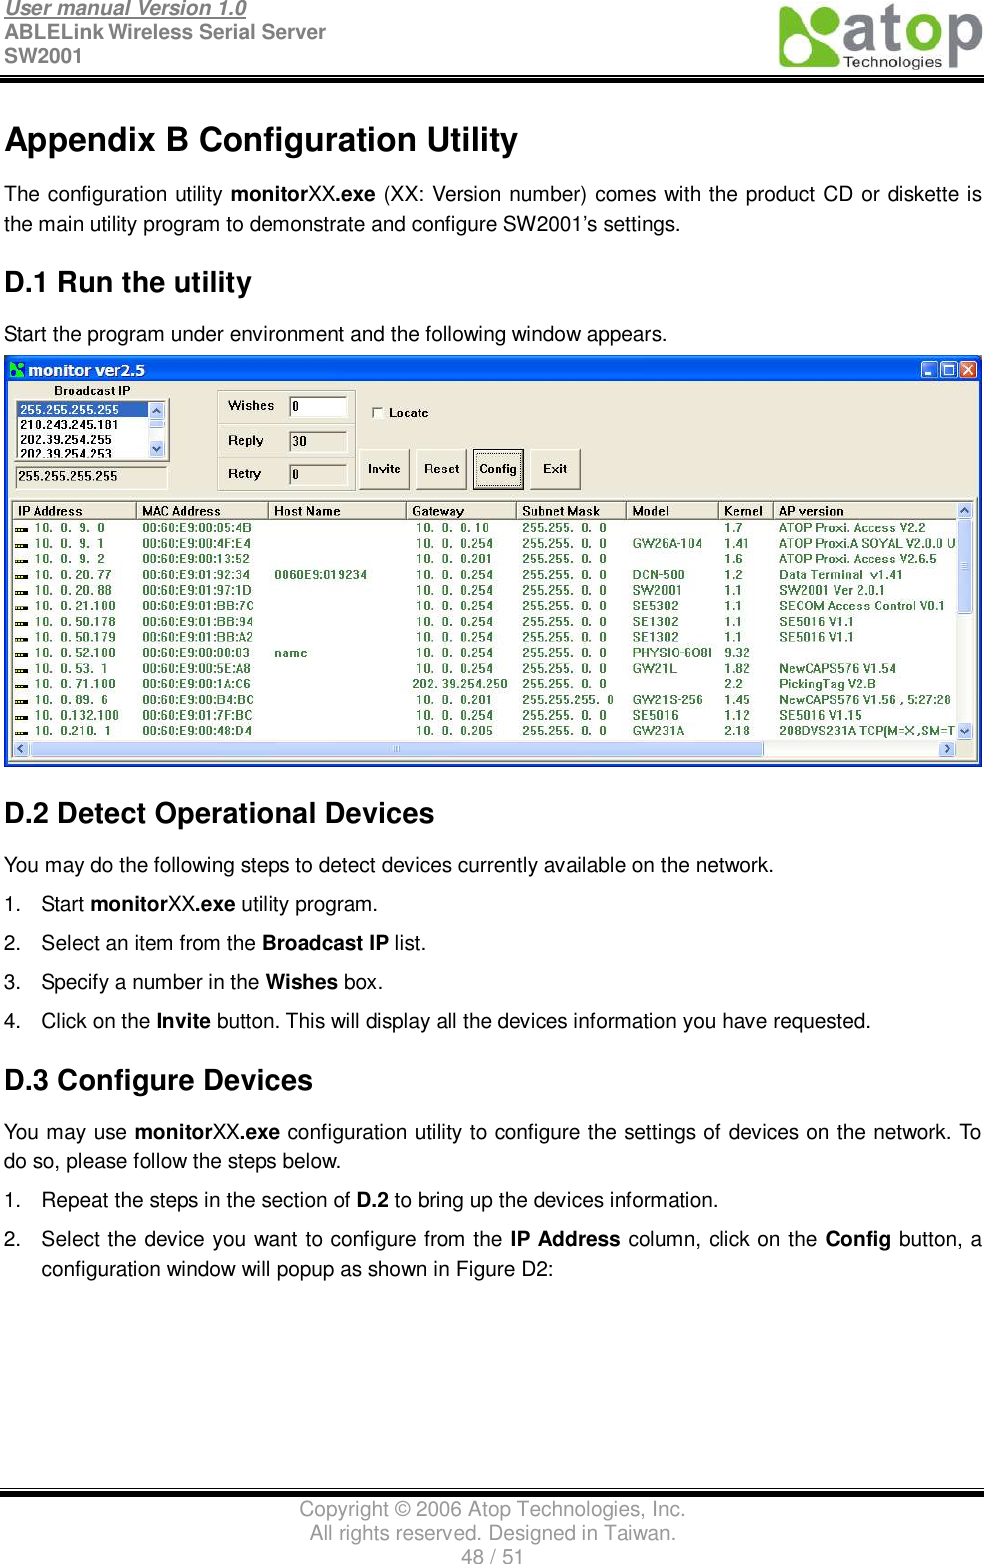 User manual Version 1.0 ABLELink Wireless Serial Server  SW2001                                                                                                                               Copyright © 2006 Atop Technologies, Inc. All rights reserved. Designed in Taiwan. 48 / 51   Appendix B Configuration Utility The configuration utility monitorXX.exe (XX: Version number) comes with the product CD or diskette is the main utility program to demonstrate and configure SW2001’s settings. D.1 Run the utility Start the program under environment and the following window appears.  D.2 Detect Operational Devices You may do the following steps to detect devices currently available on the network. 1. Start monitorXX.exe utility program. 2. Select an item from the Broadcast IP list. 3. Specify a number in the Wishes box. 4. Click on the Invite button. This will display all the devices information you have requested. D.3 Configure Devices You may use monitorXX.exe configuration utility to configure the settings of devices on the network. To do so, please follow the steps below. 1. Repeat the steps in the section of D.2 to bring up the devices information. 2. Select the device you want to configure from the IP Address column, click on the Config button, a configuration window will popup as shown in Figure D2: 